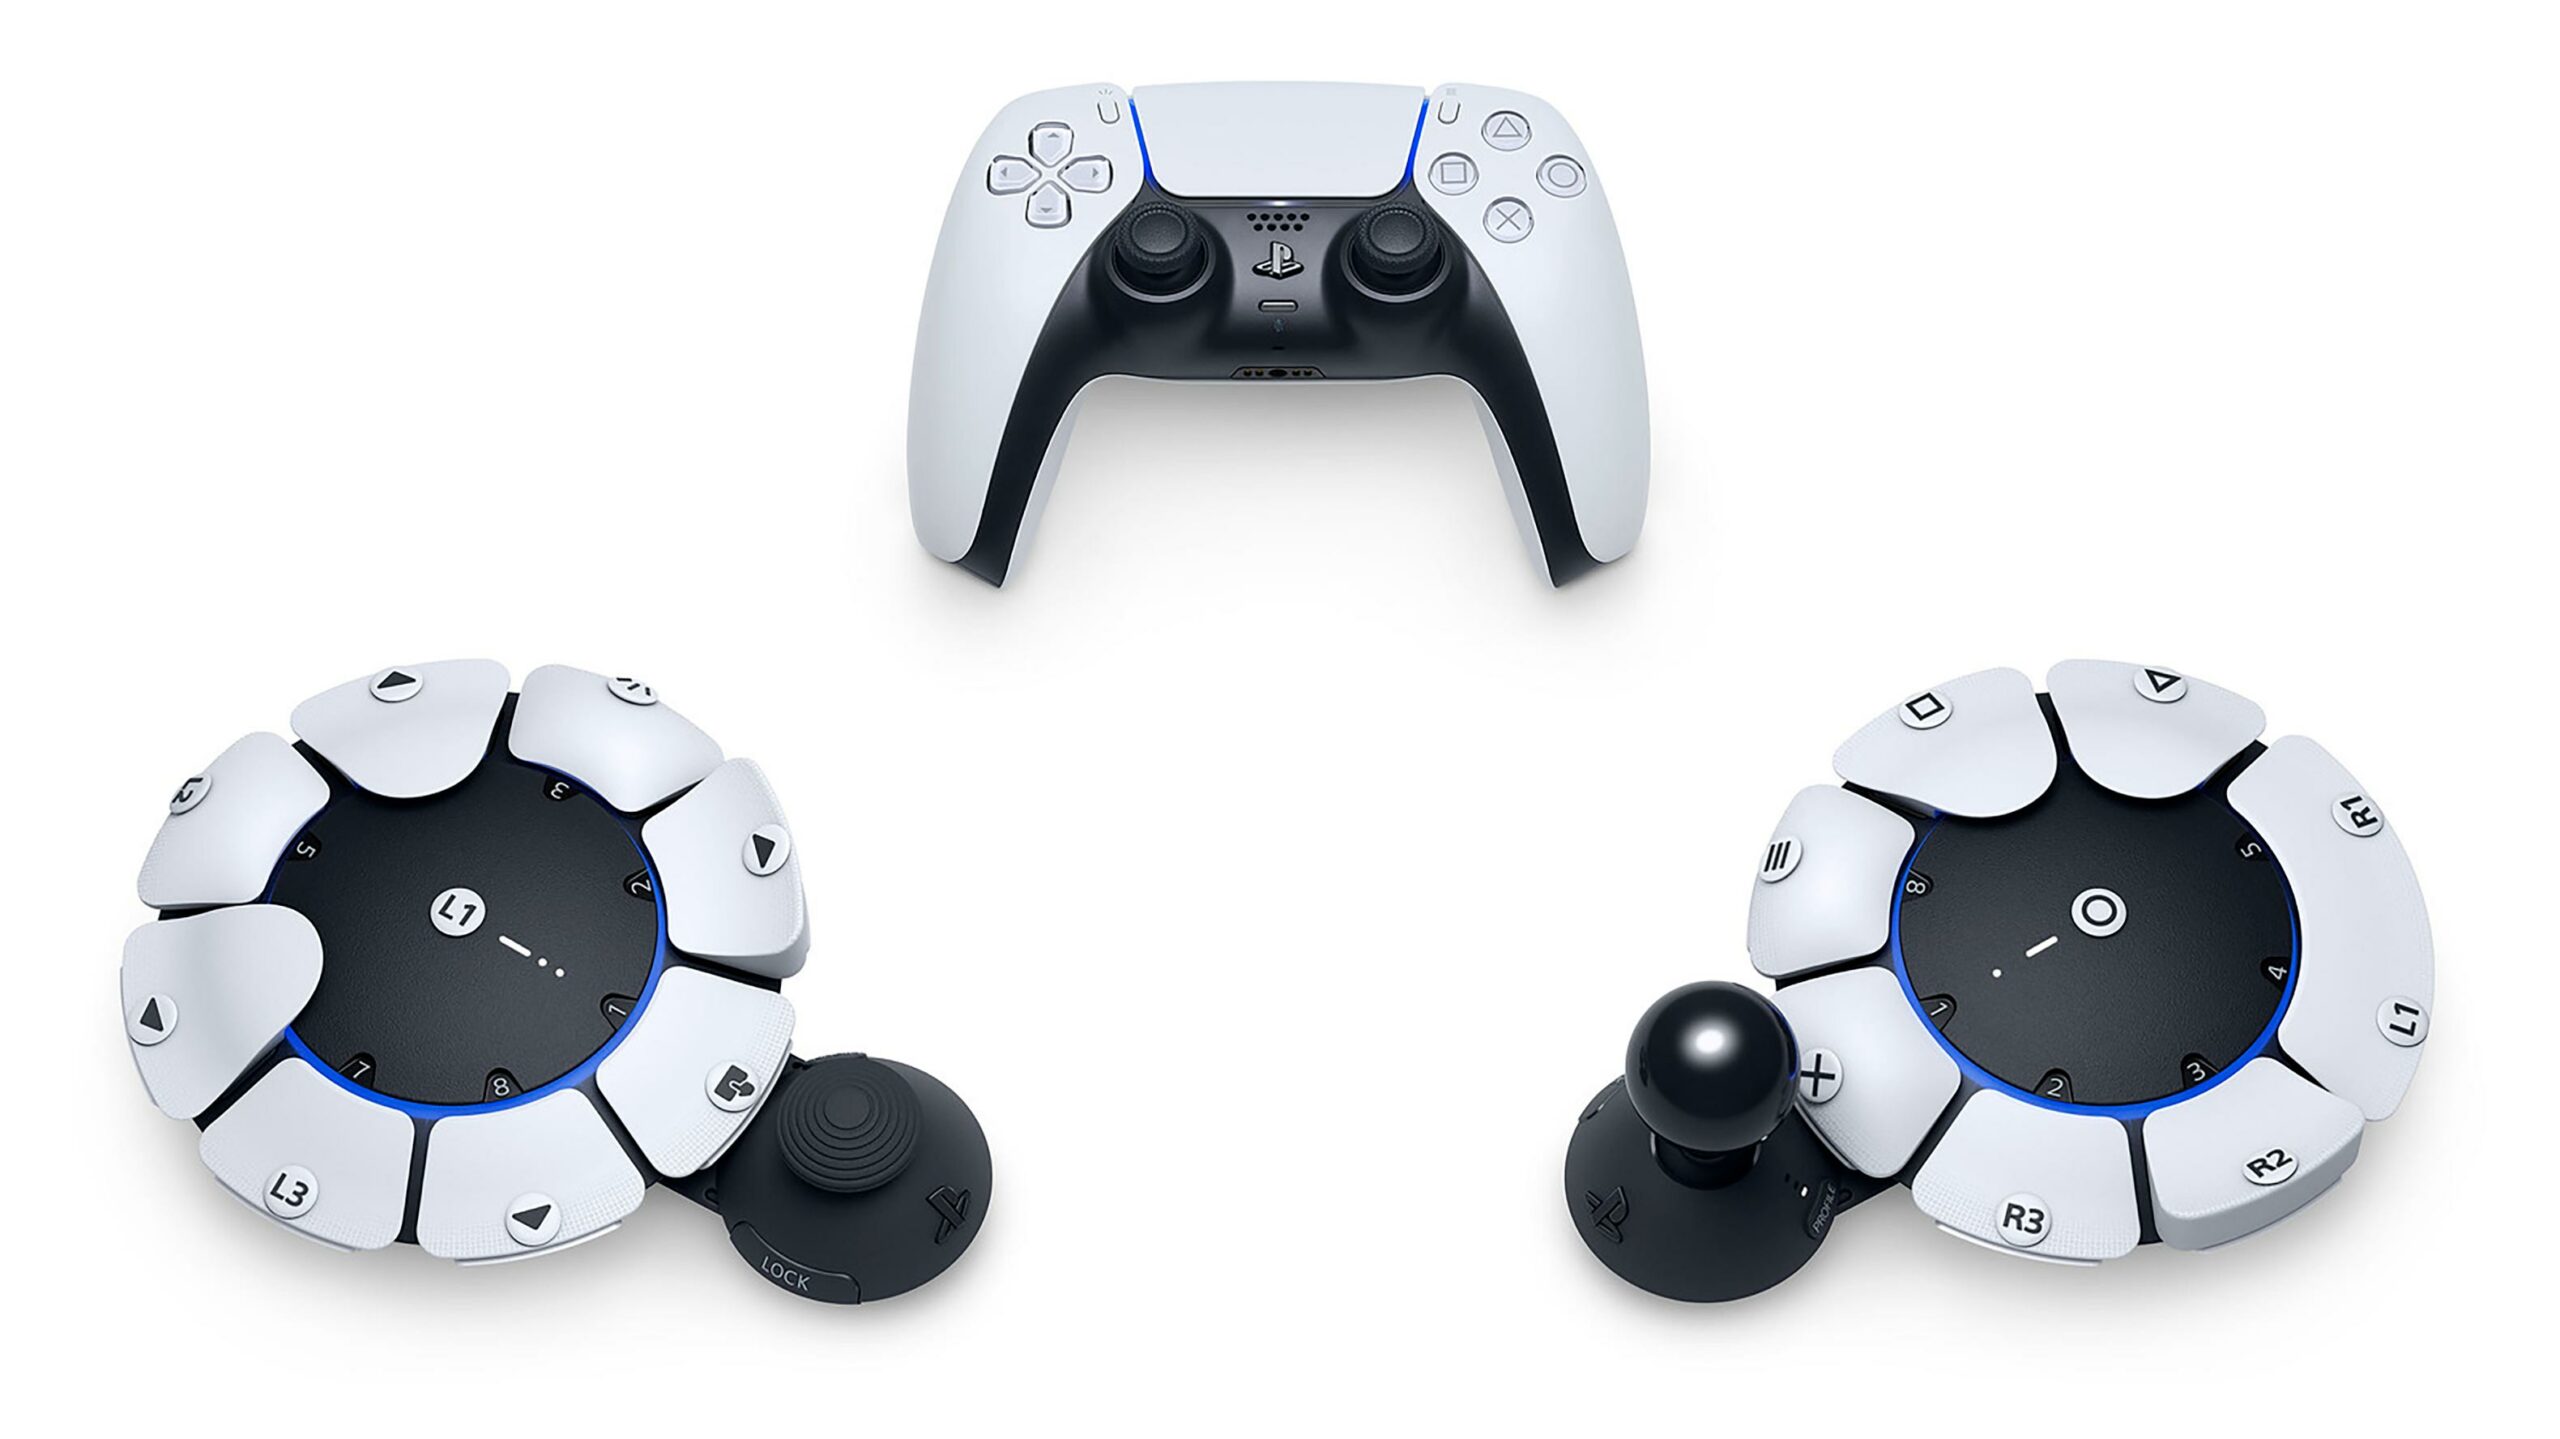 PlayStation's Project Leonardo accessibility controller kit is a spherical, white-and-black device with various buttons on it.